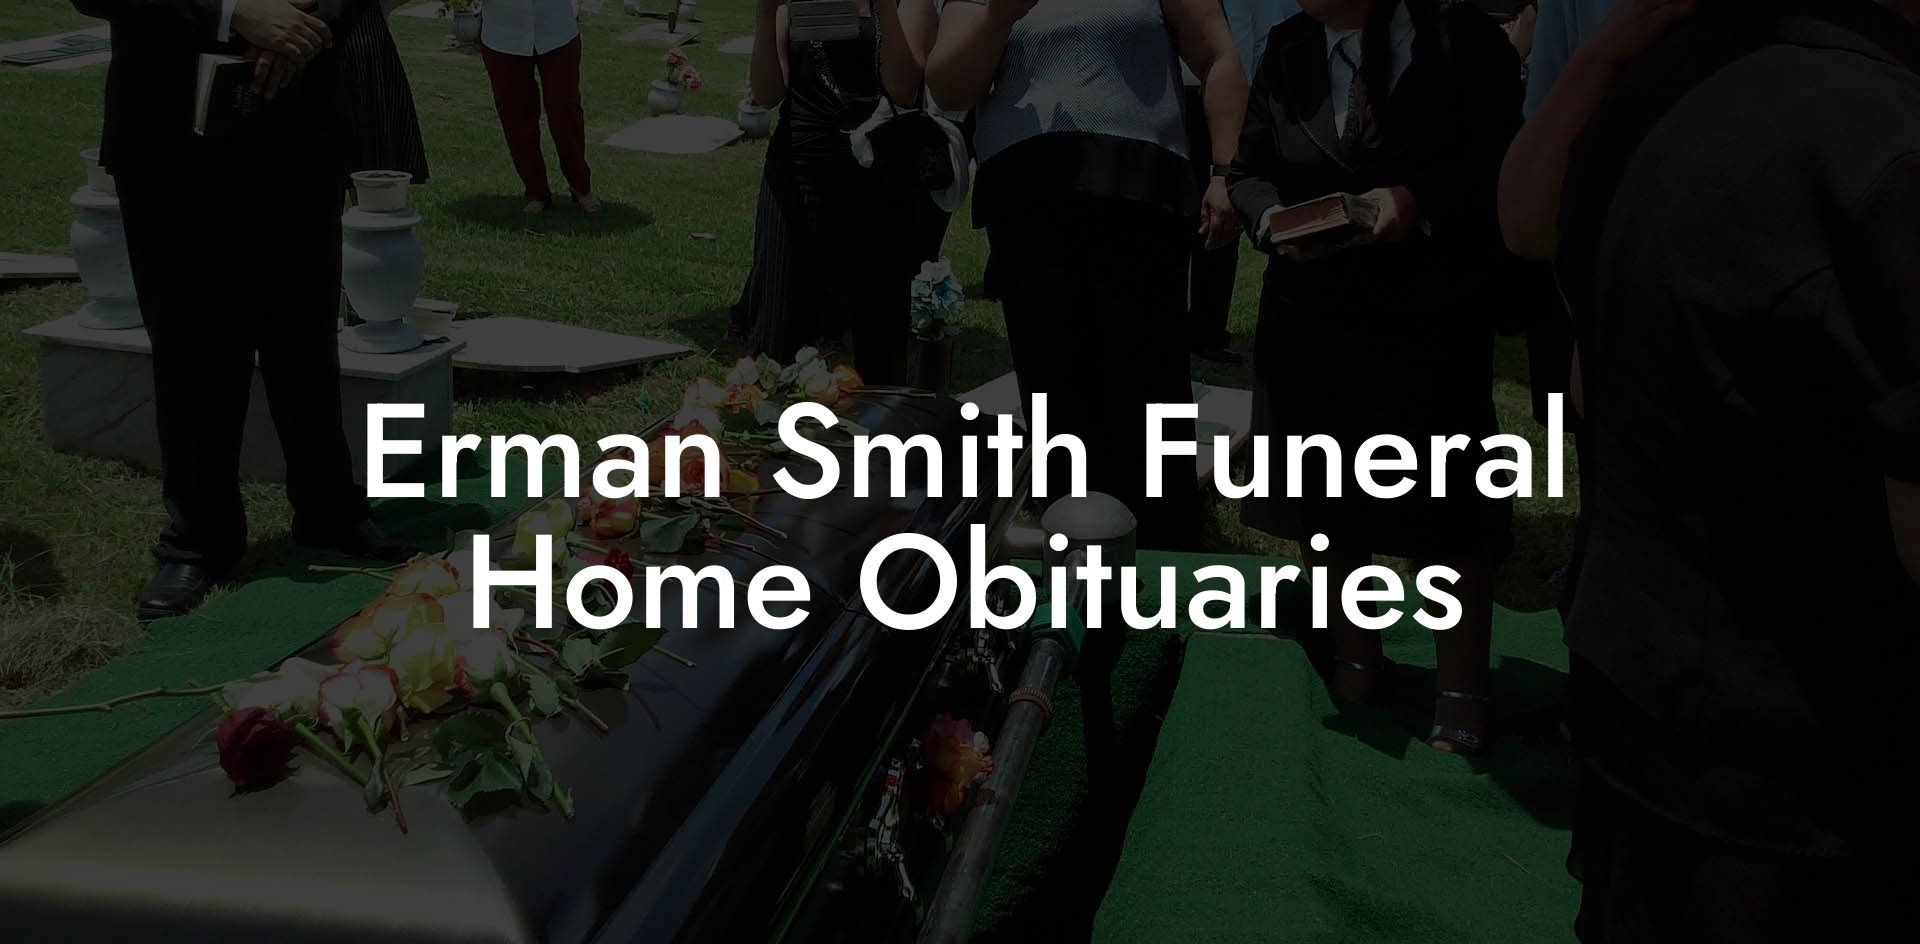 Erman Smith Funeral Home Obituaries